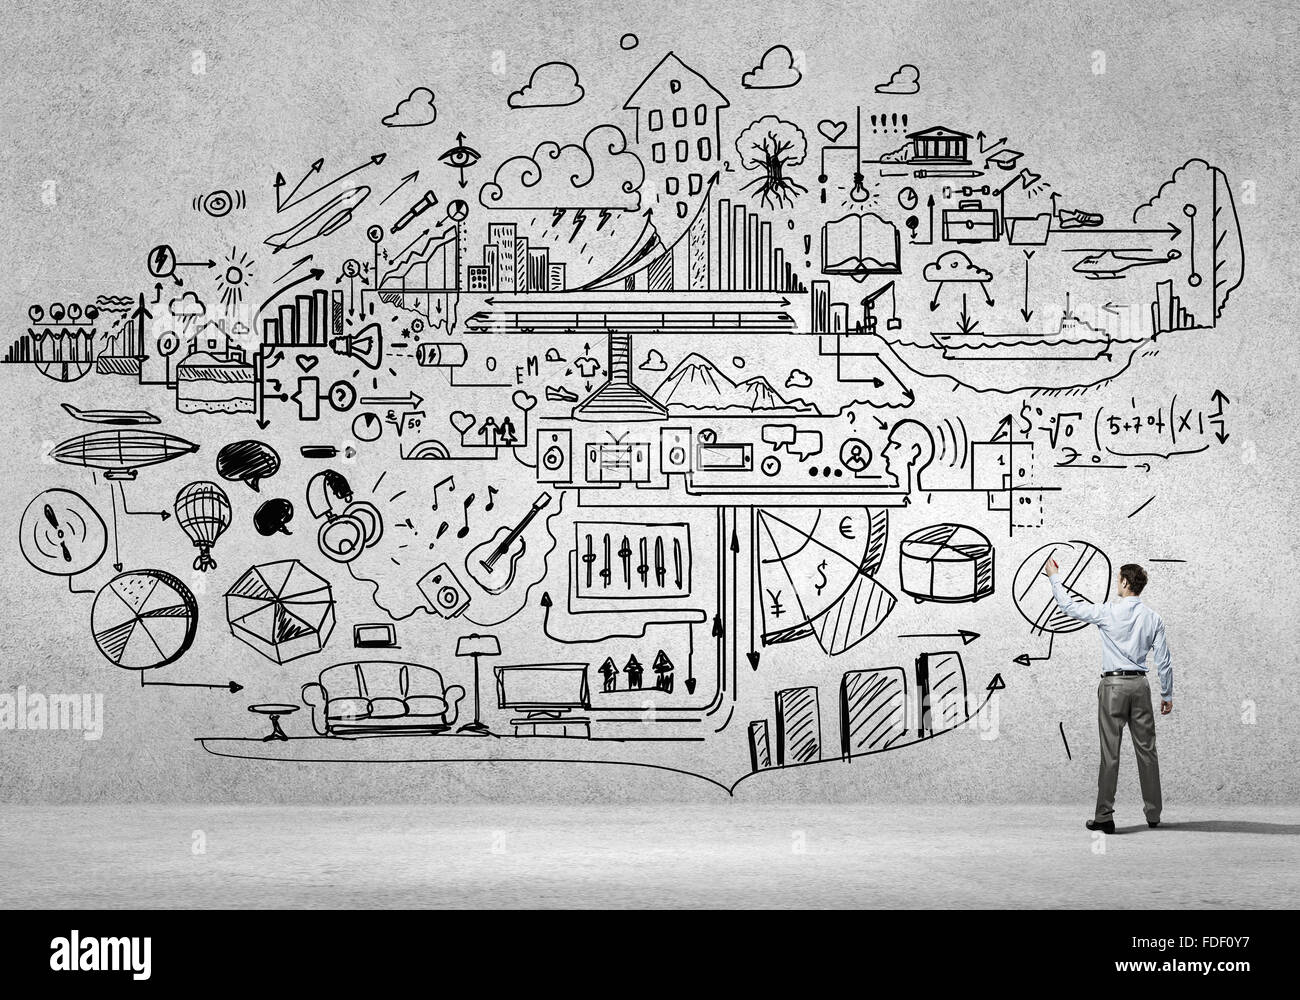 Background Image With Business Sketch And Strategy Drawings Stock Photo  Picture And Royalty Free Image Image 25644875